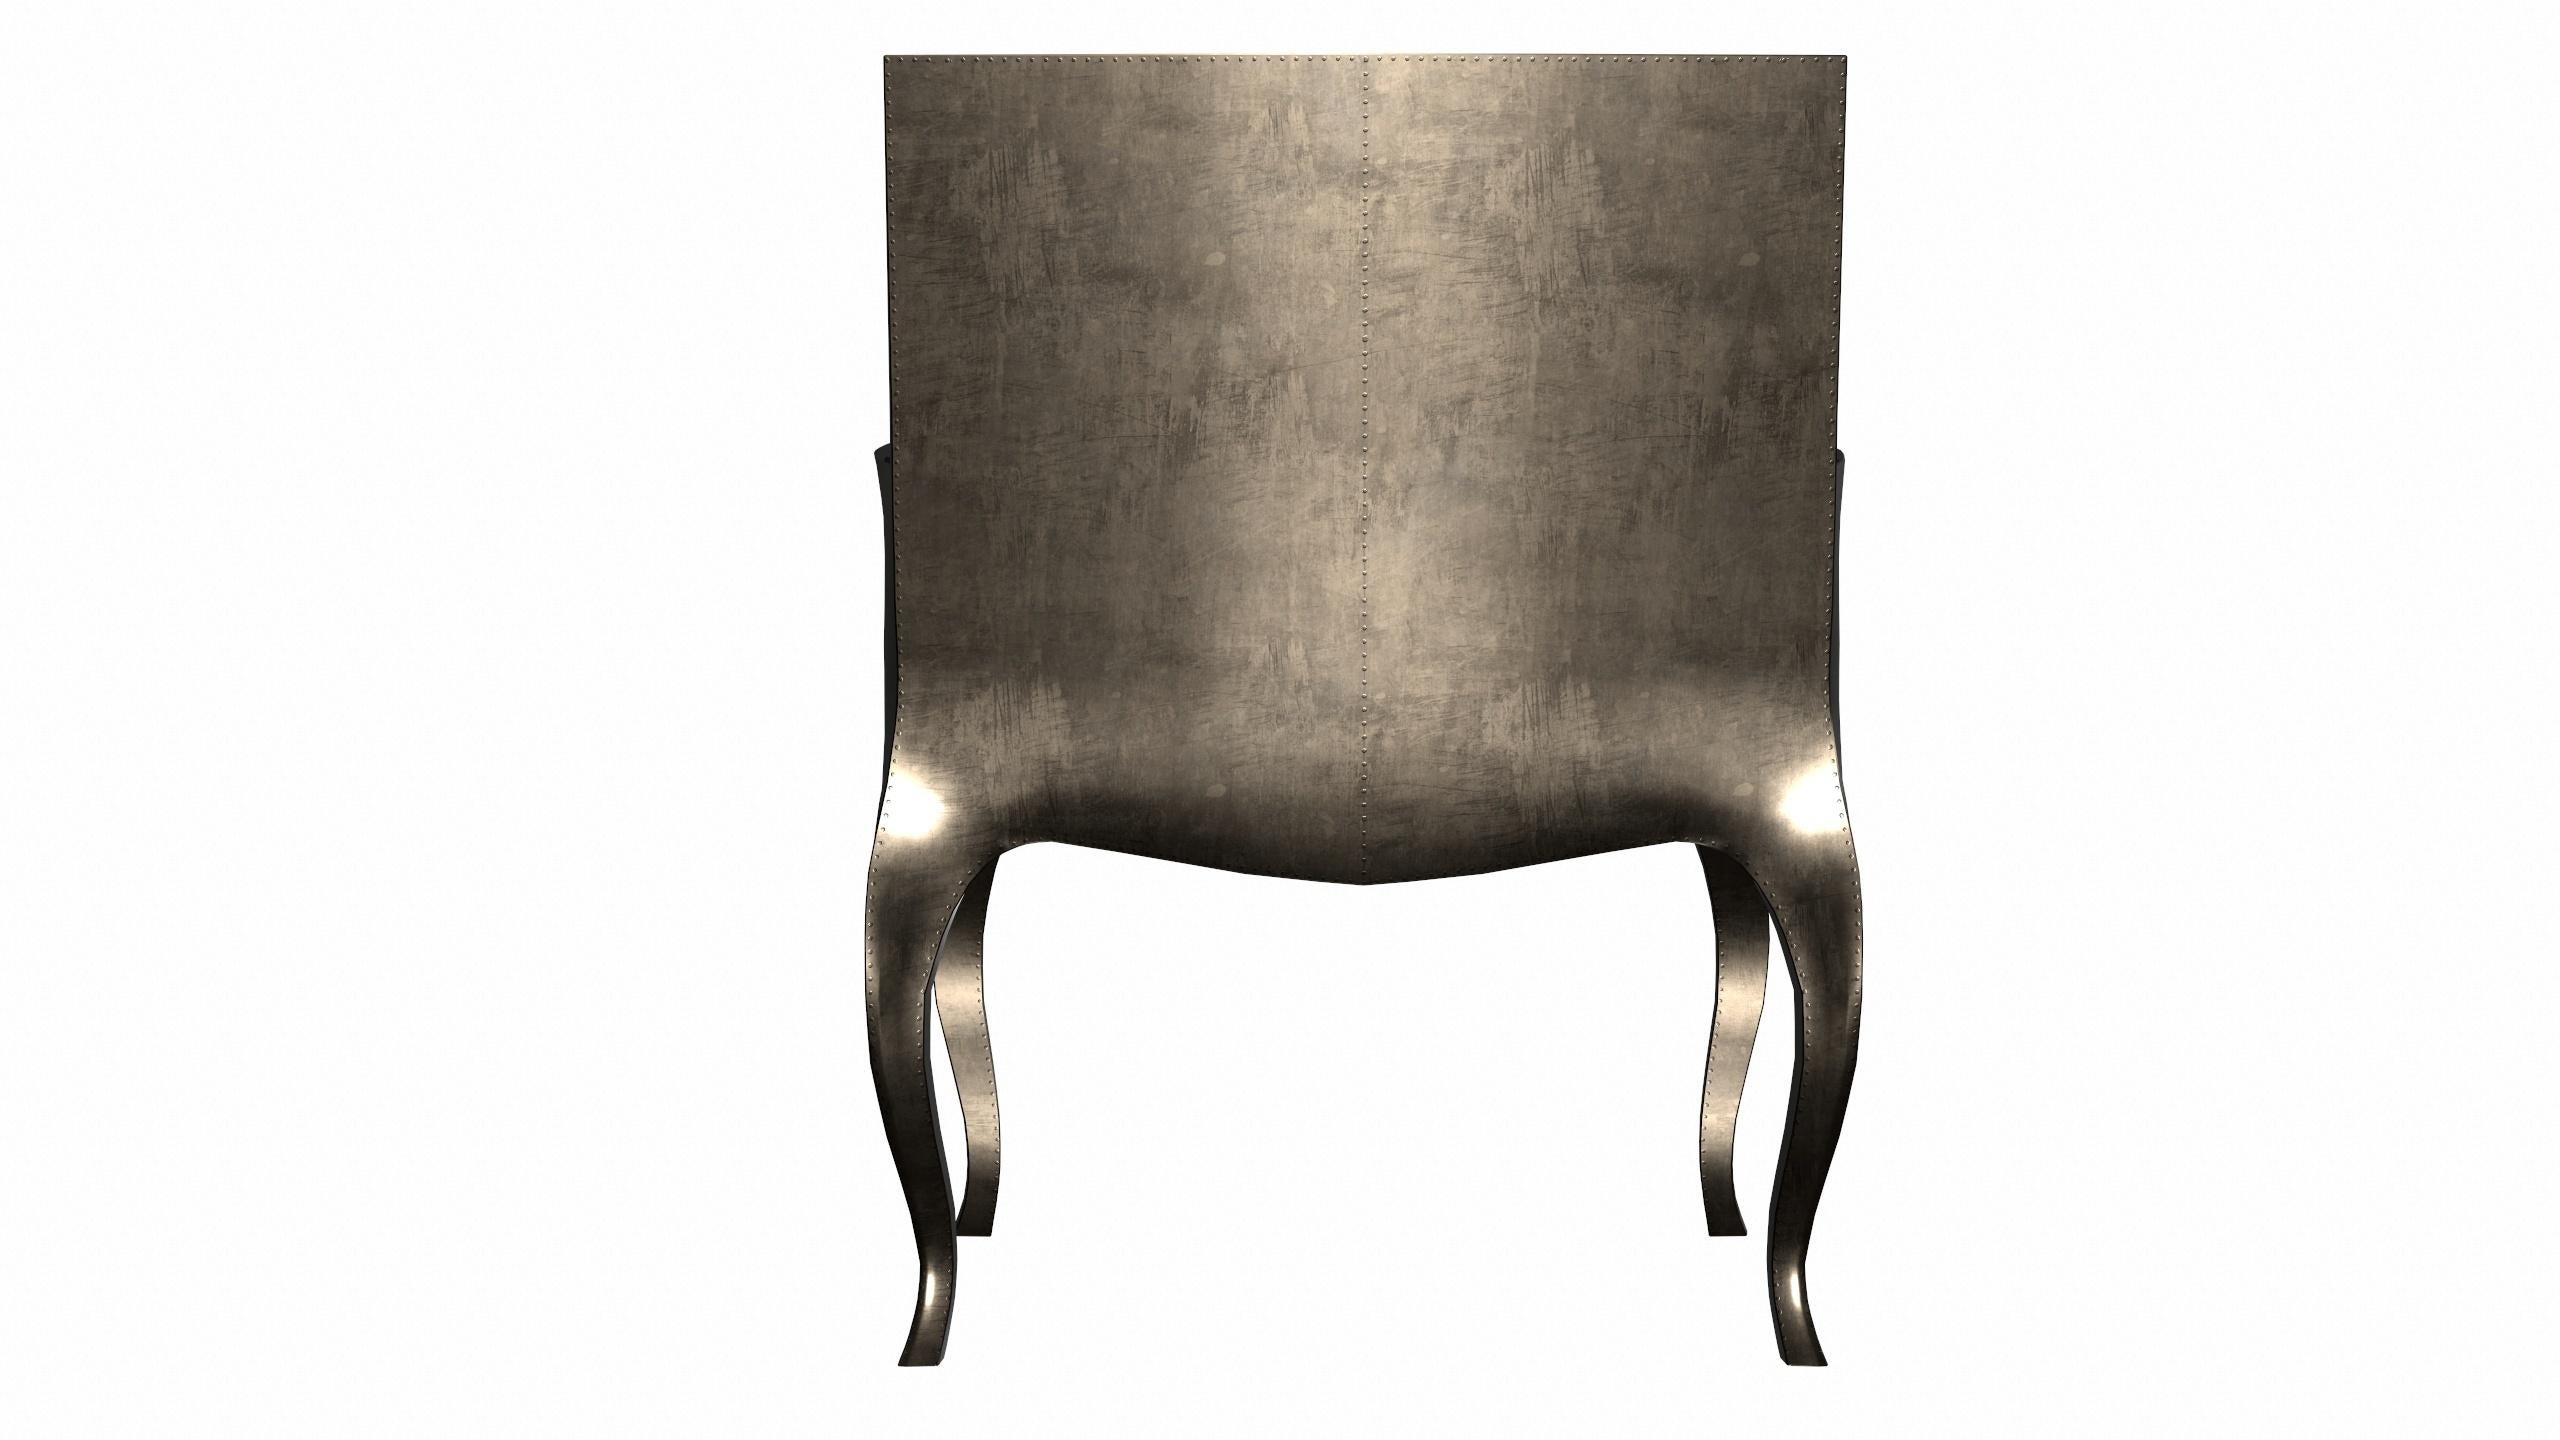 Hand-Carved Art Deco Armchairs in Smooth Antique Bronze by Paul Mathieu for S. Odegard For Sale